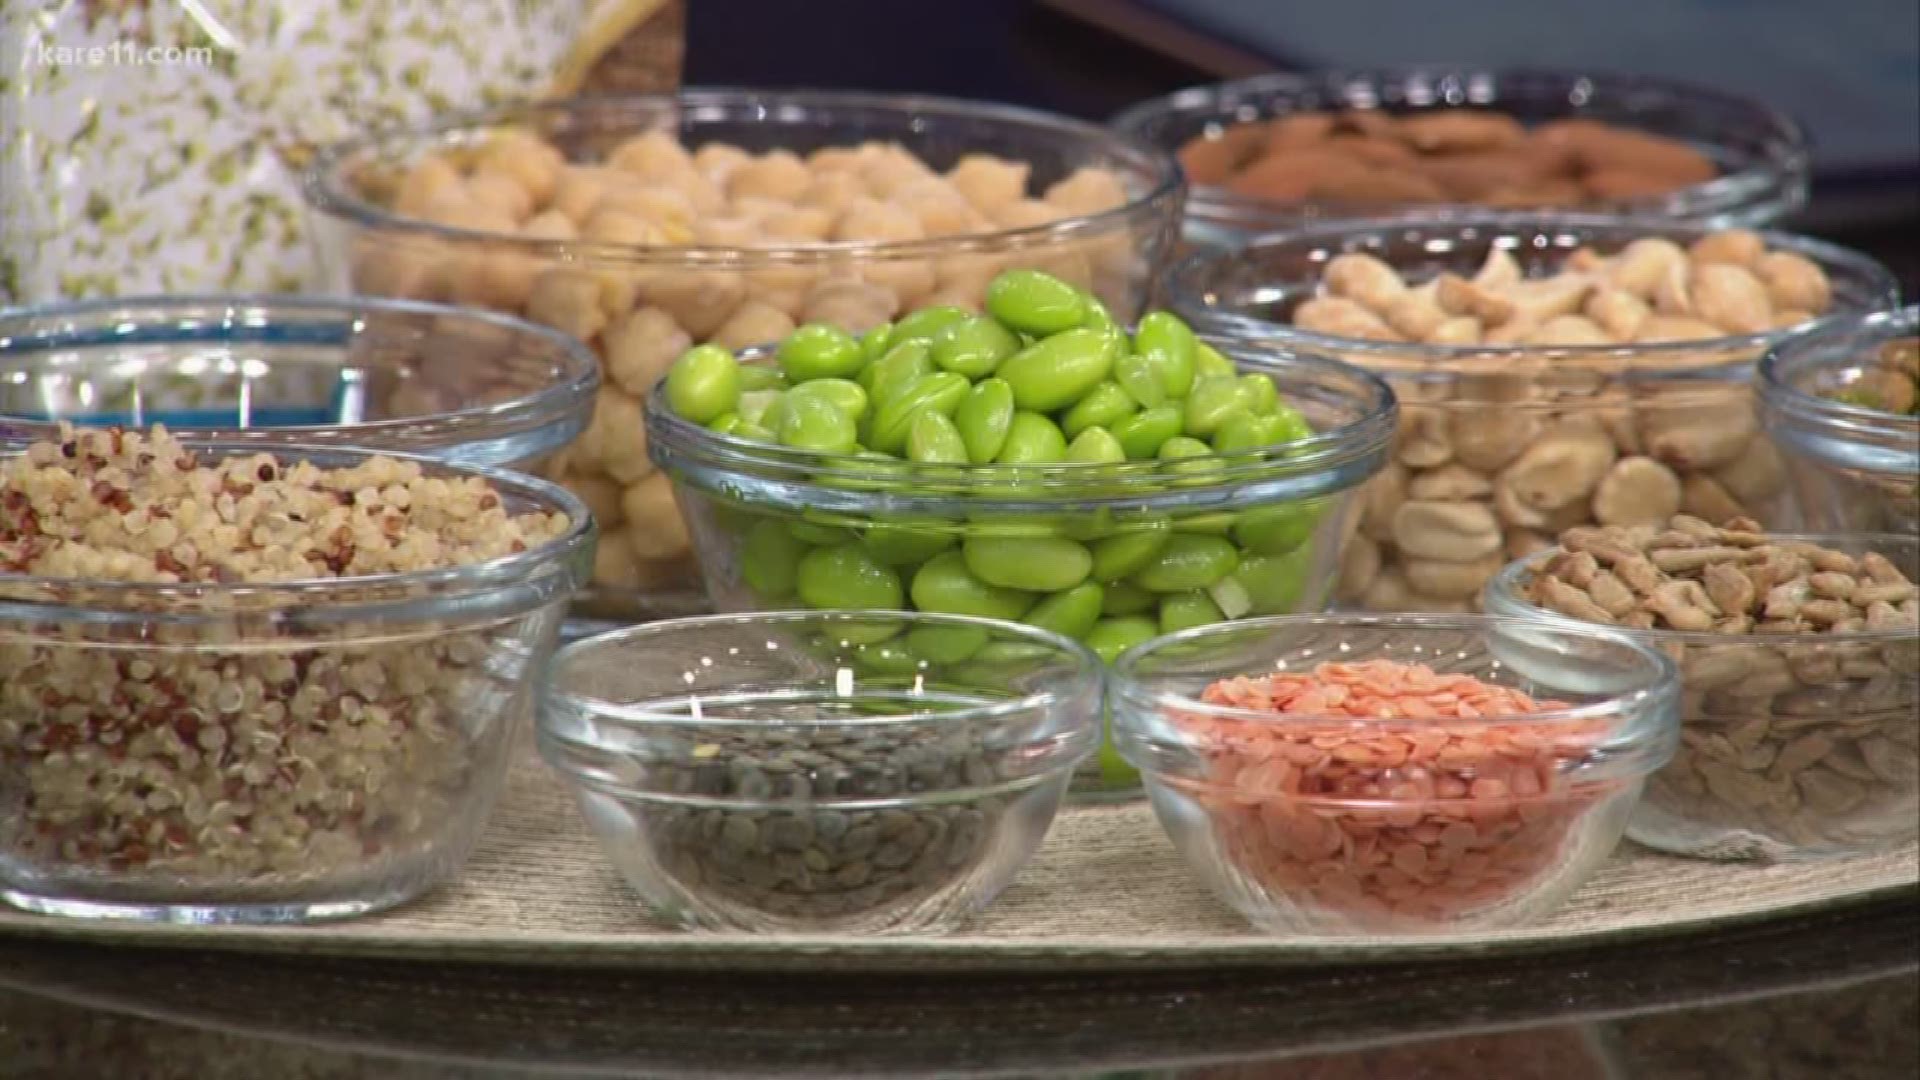 Susan Moores, RD, Kowalski's Nutritionist shows us which plant foods contain the most protein and how to create an easy-to-make plant-based, protein-rich meal. https://kare11.tv/2n5IYCx